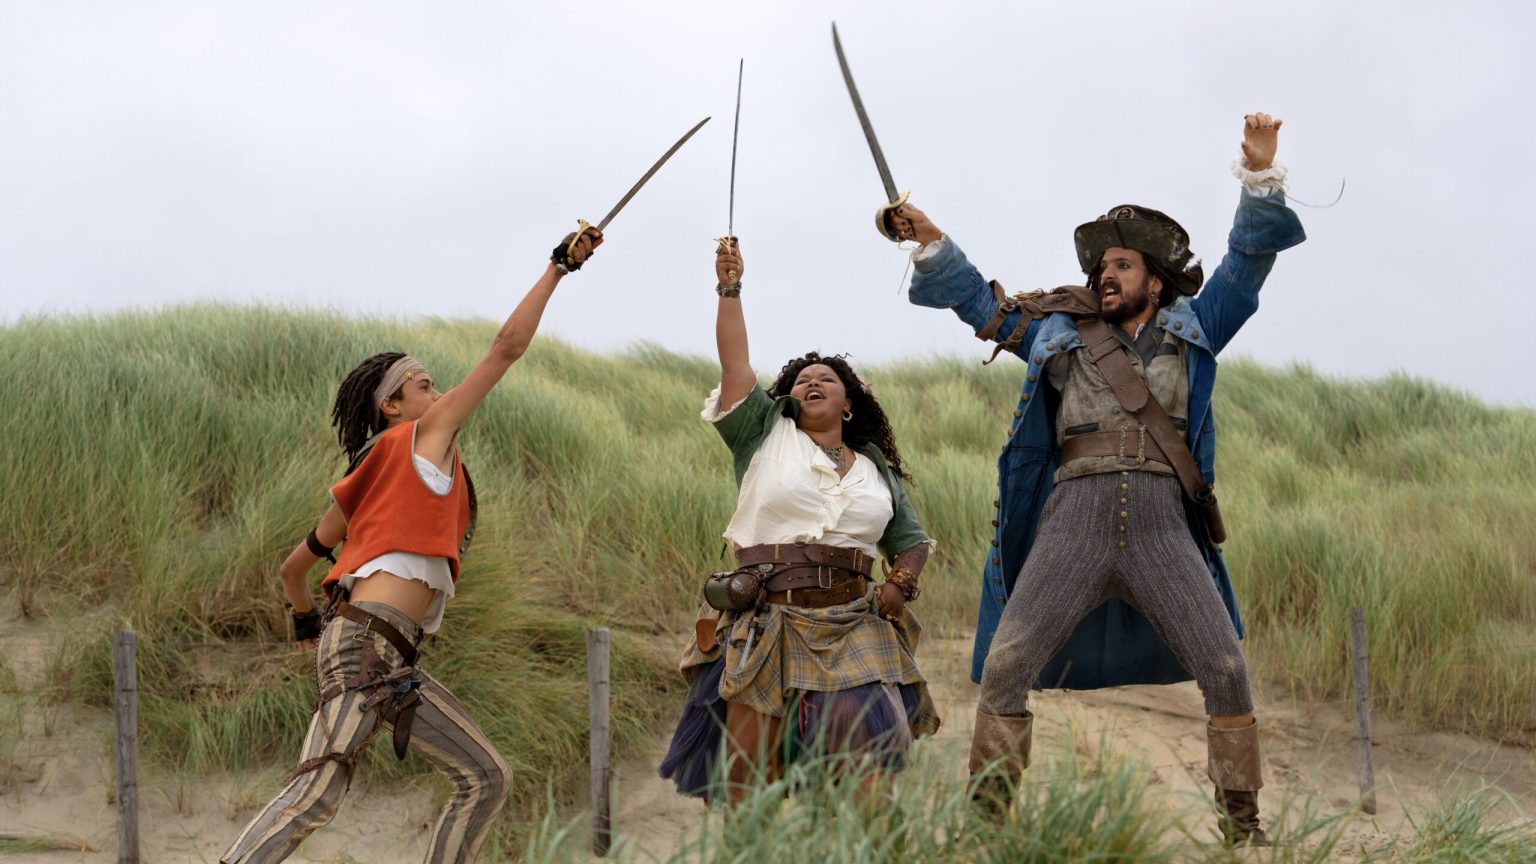 Still from De Piraten van Hiernaast 2. Billy, his mom Betsie and his dad Hector are standing on a dune, swords up in the air and cheering.. The swords are crossed in the middle.